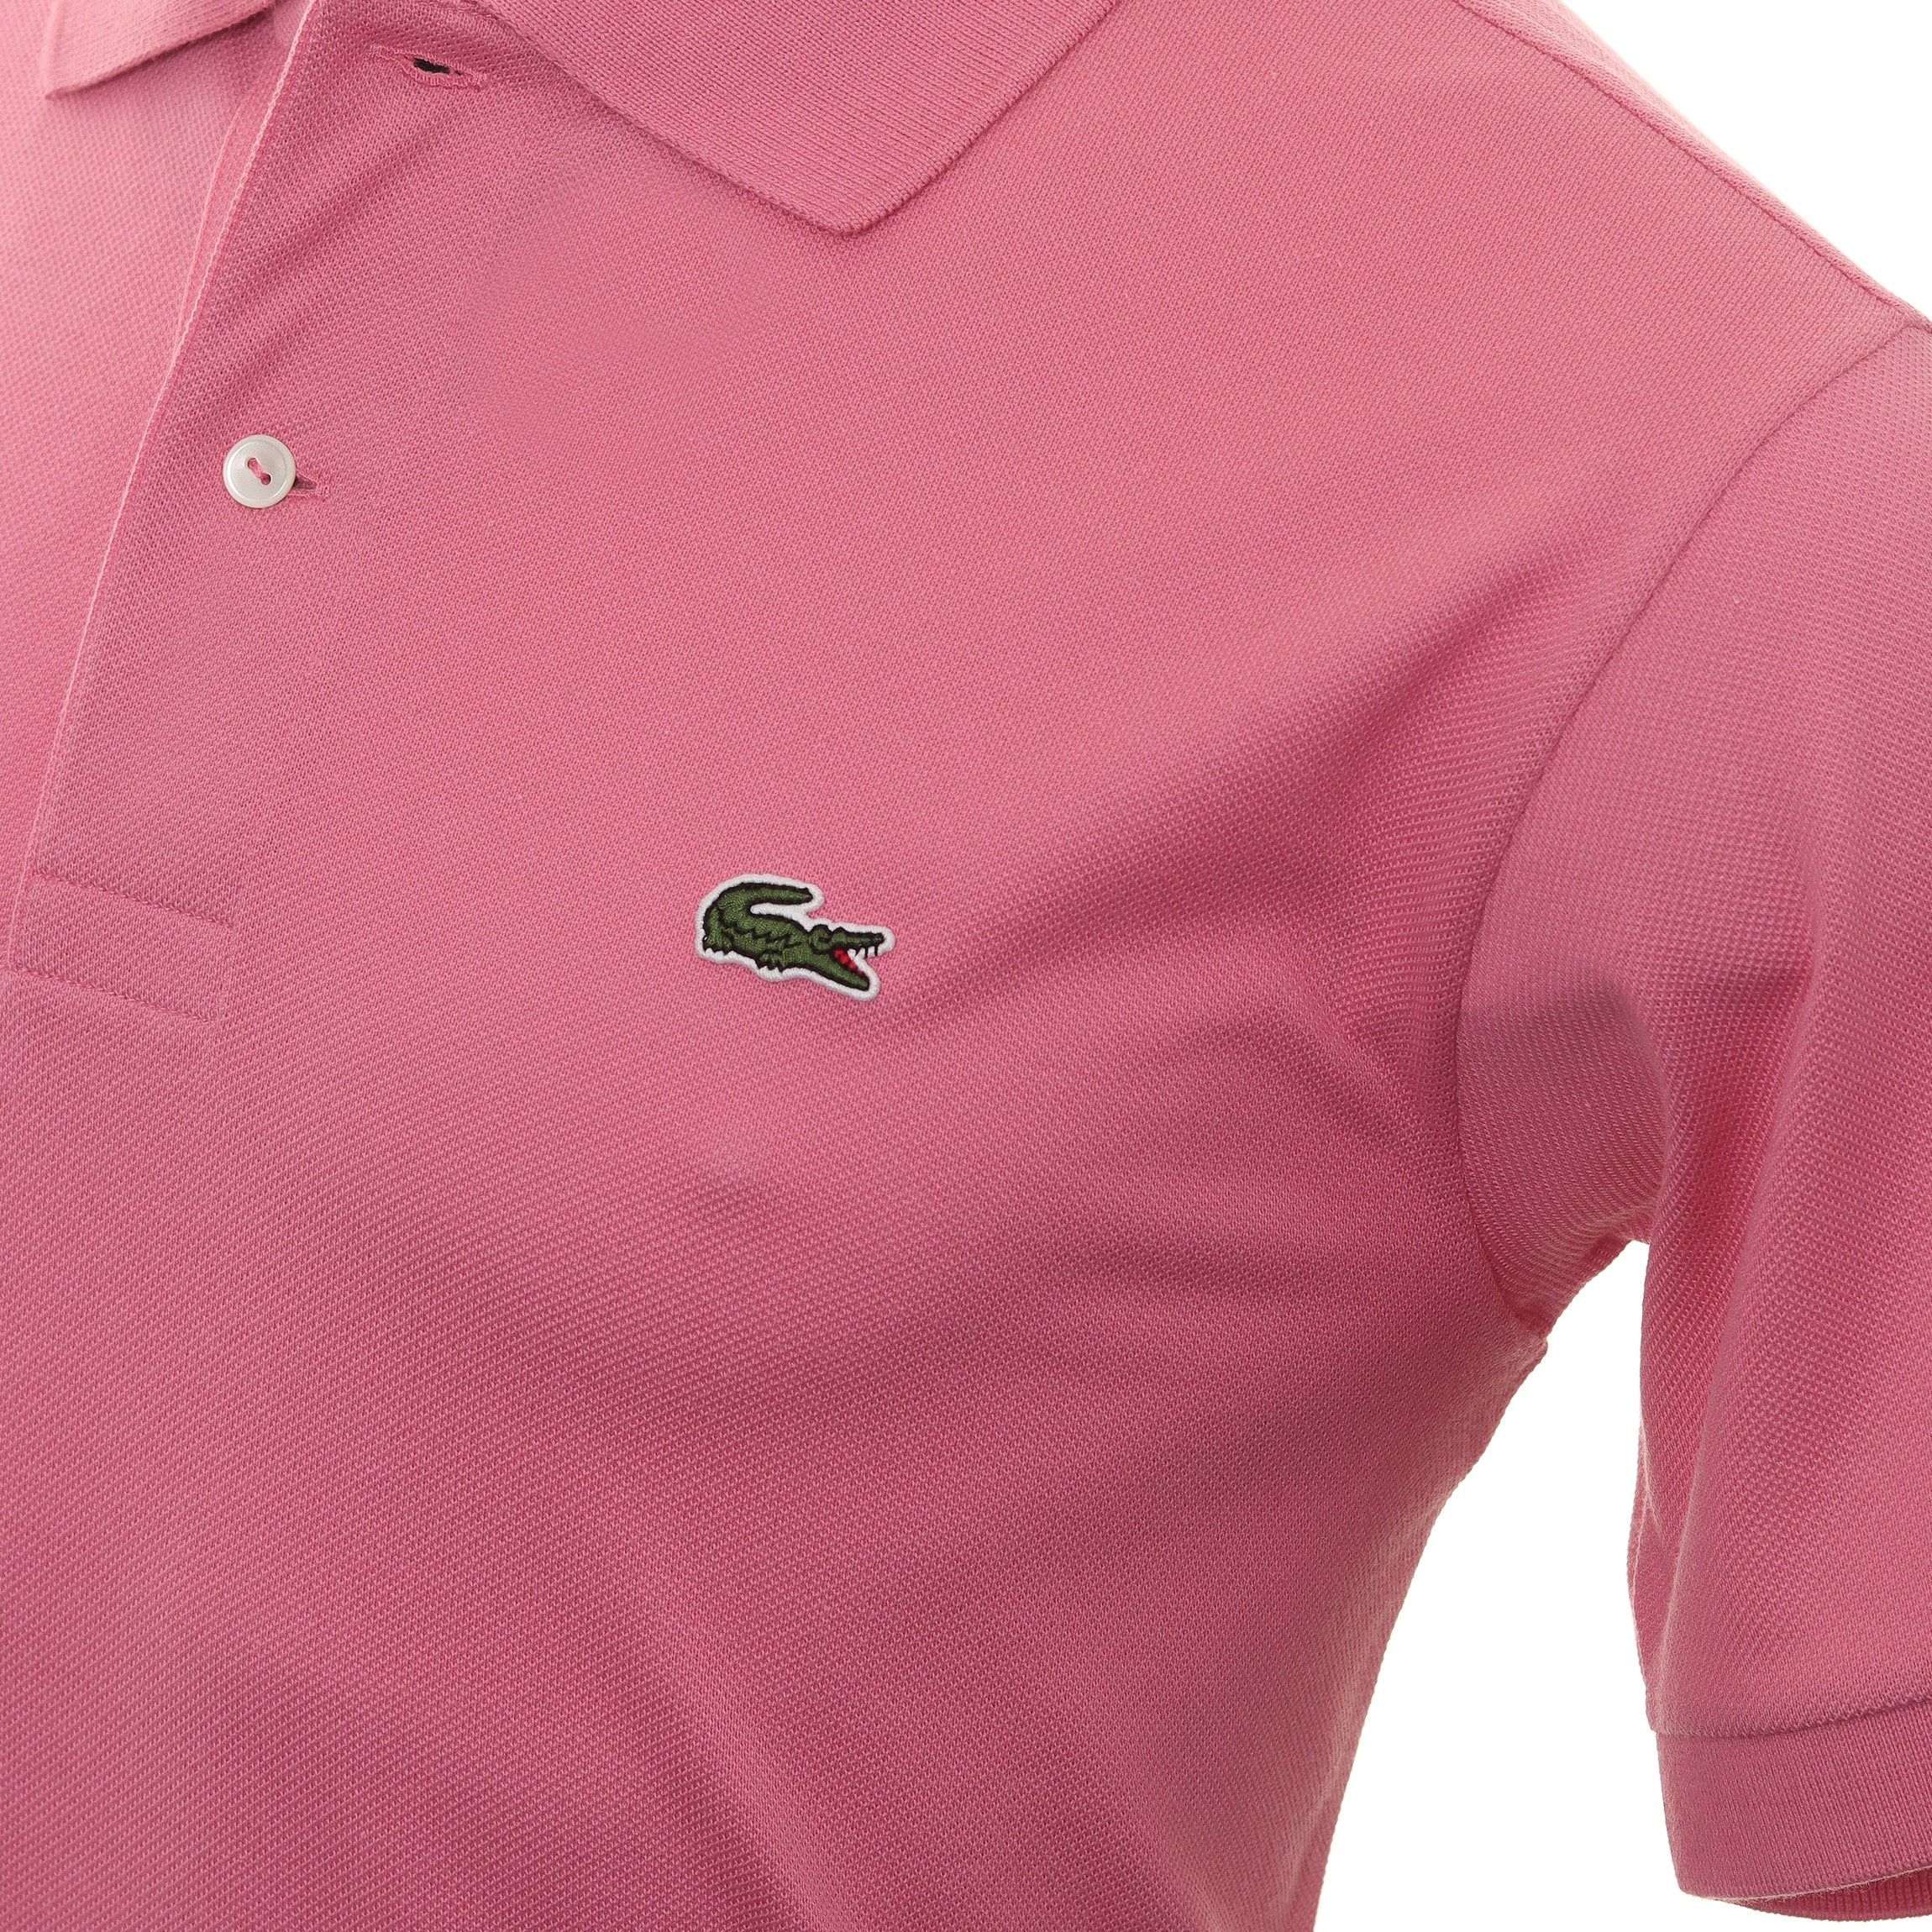 Lacoste Classic Pique Polo Shirt L1212 Reseda Pink 2R3 | Function18 |  Restrictedgs